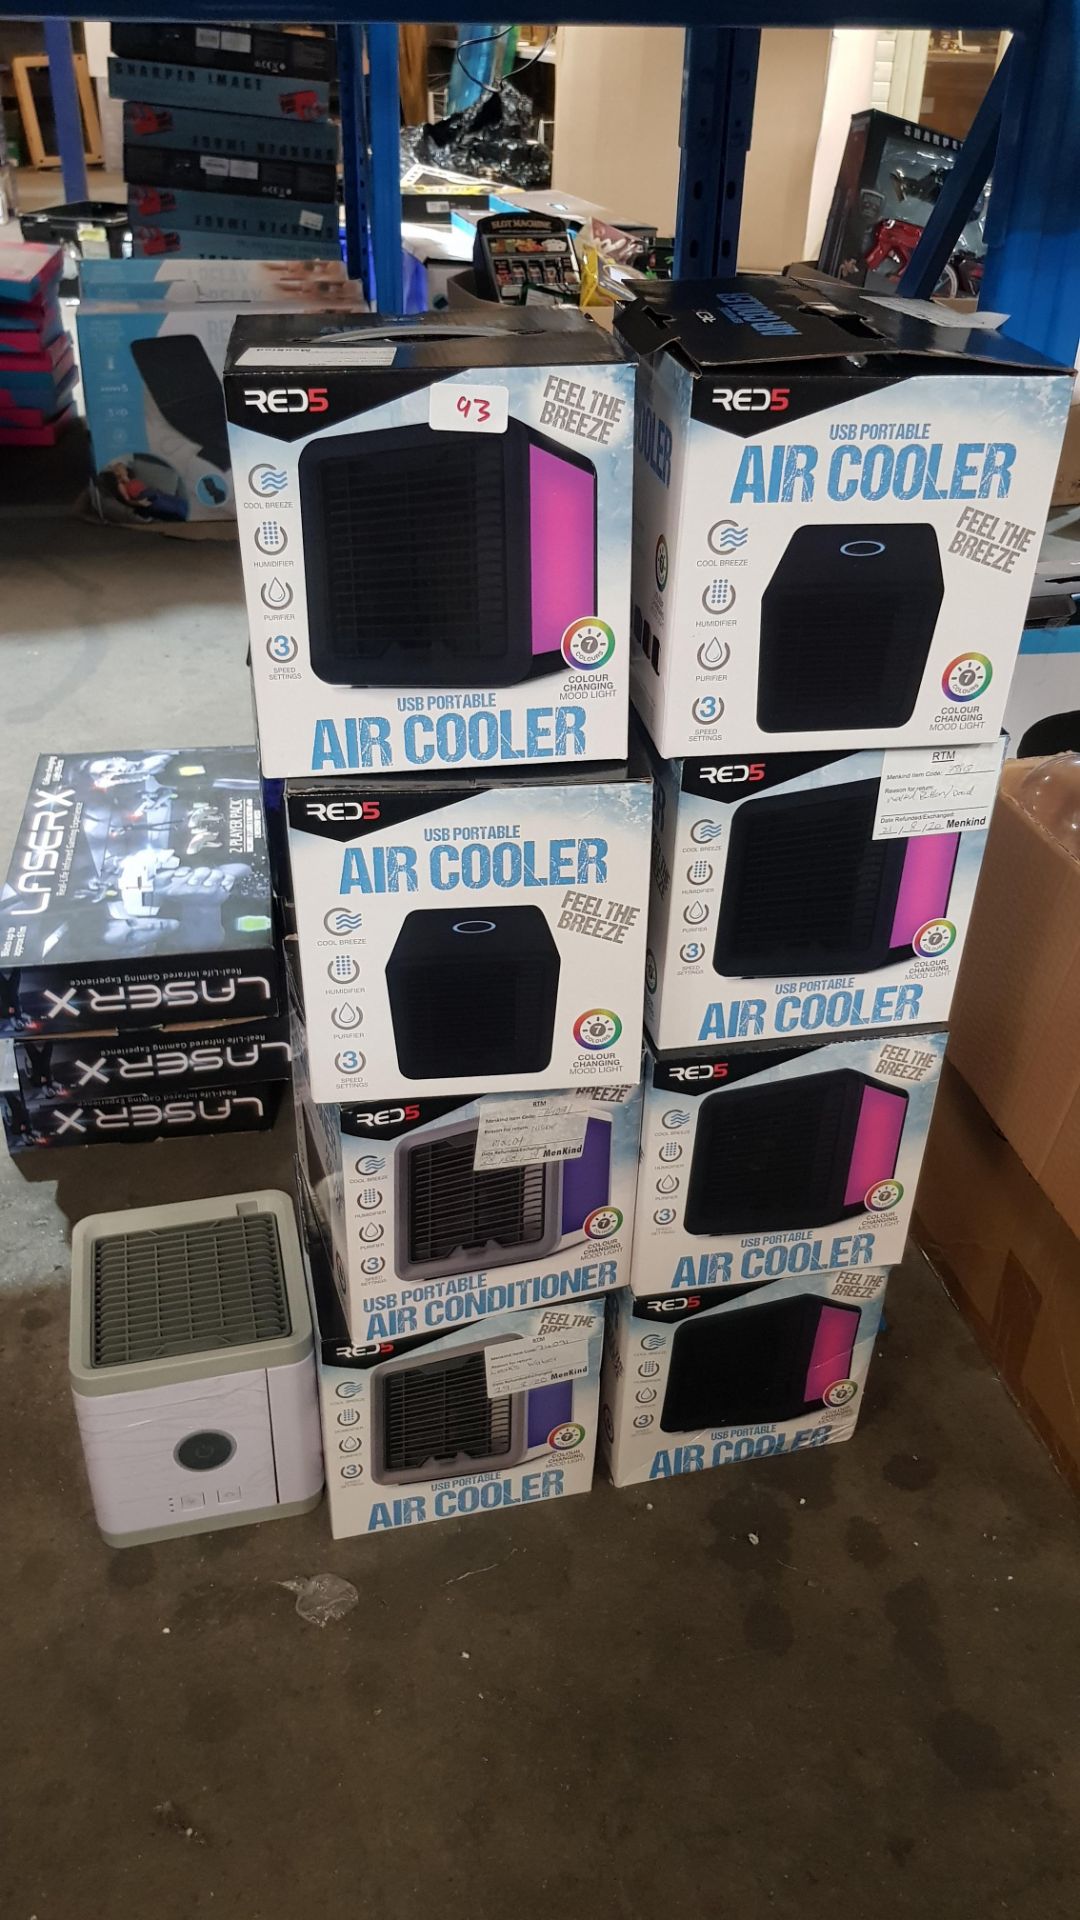 (R3J) 9x Red5 USB Portable Air Cooler (1x No Box). (All With RTM Stickers) - Image 2 of 2